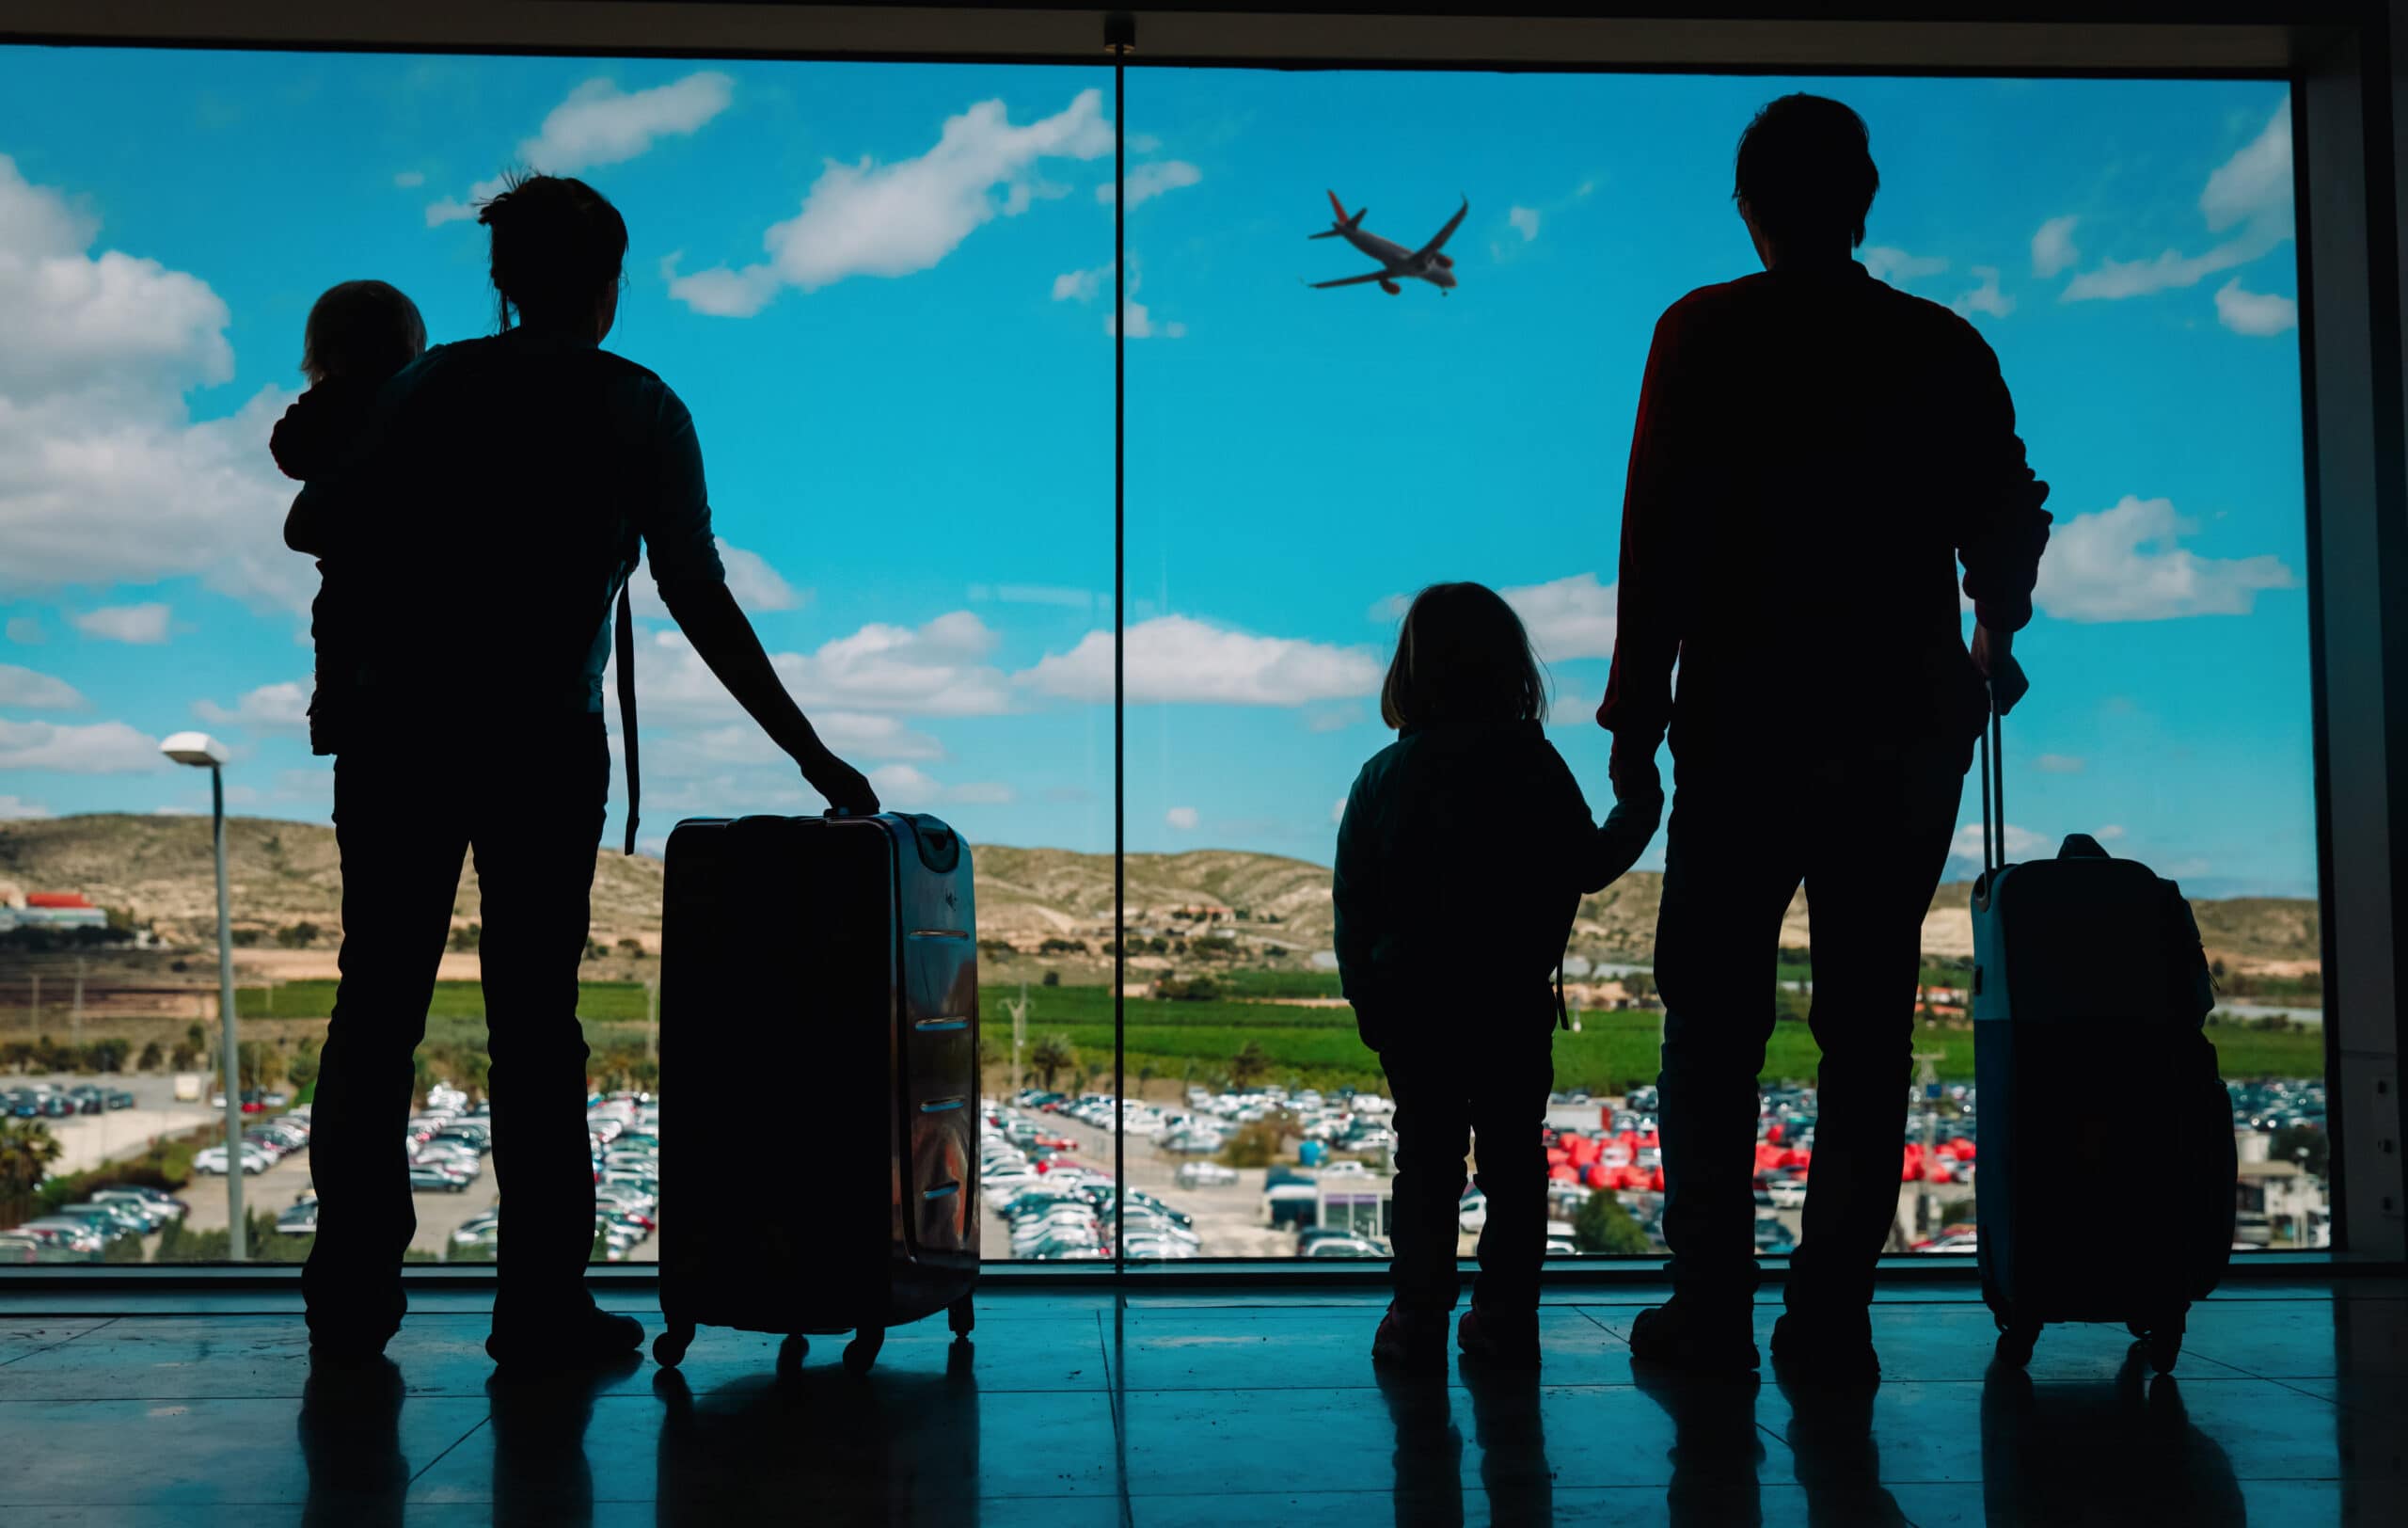 Silhouette of a family at an airport, with two adults and two children looking out a large window at a plane flying in the sky. One adult is holding a toddler, and the other is holding the hand of a small child, with luggage by their sides. This image captures a moment of anticipation and adventure, embodying the spirit of family travel.